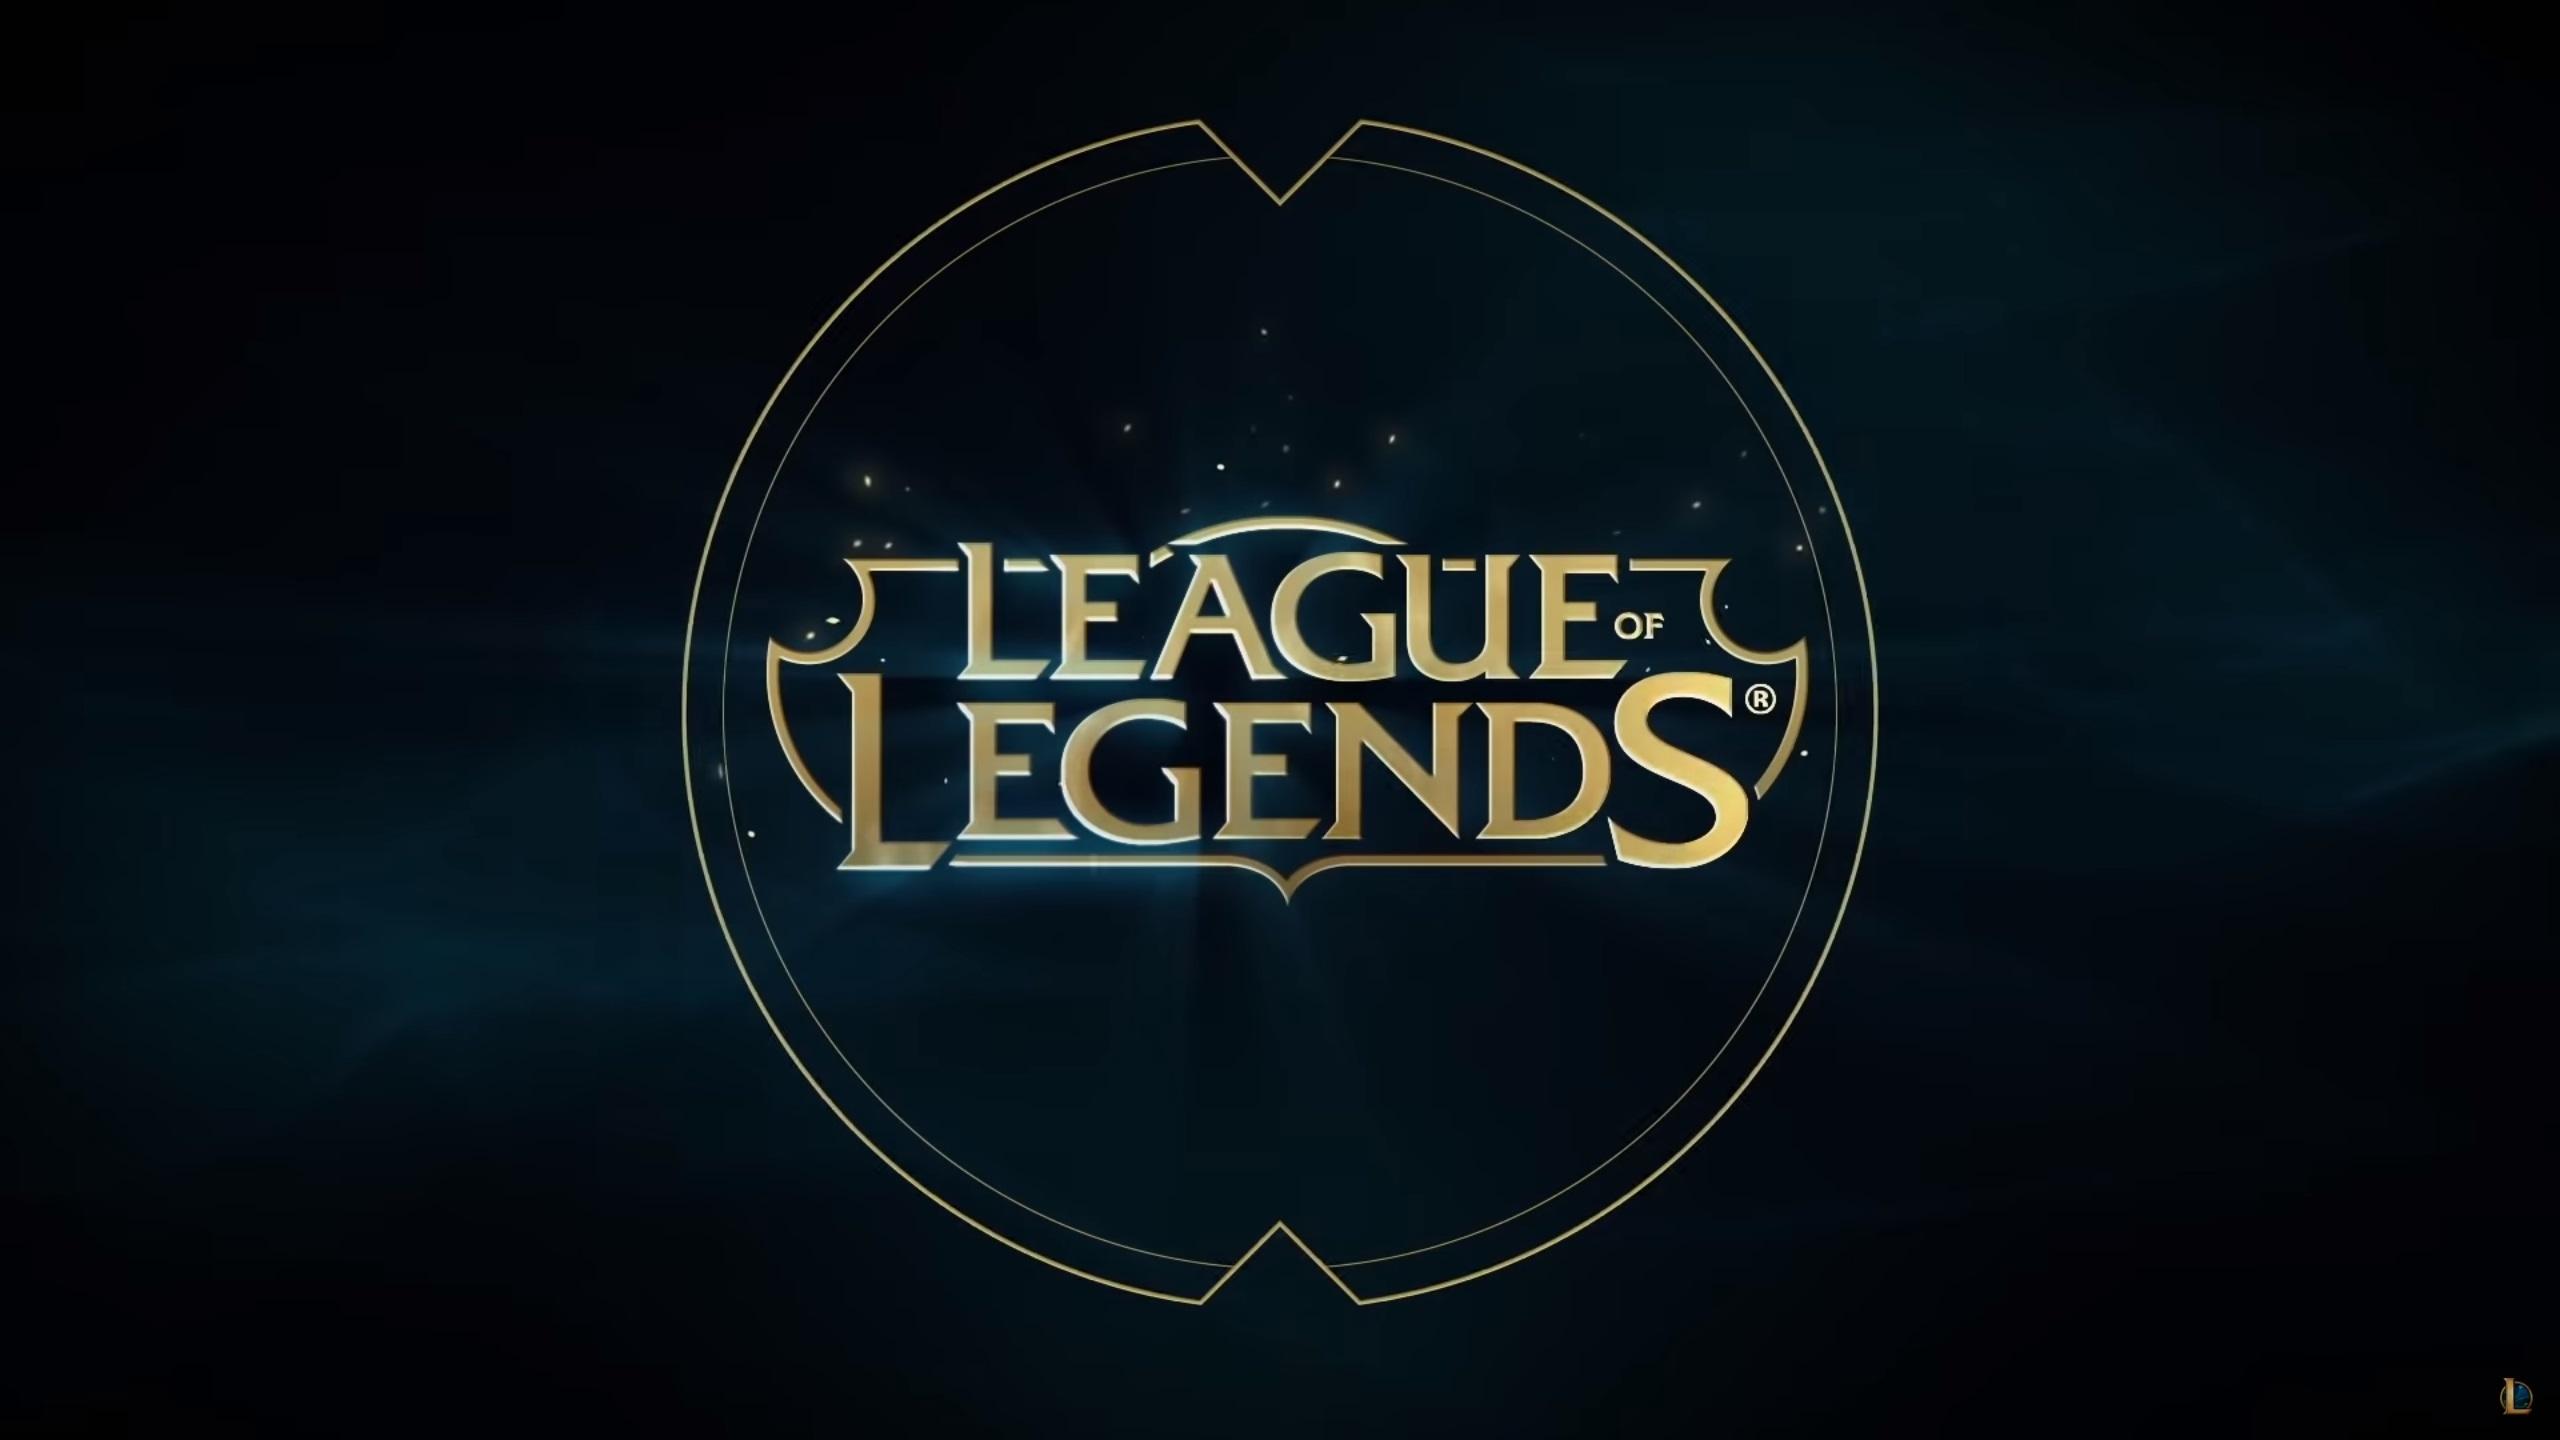 2560 x 1440 · jpeg - Download 2560x1440 League Of Legends Logo Wallpapers for iMac 27 inch ...